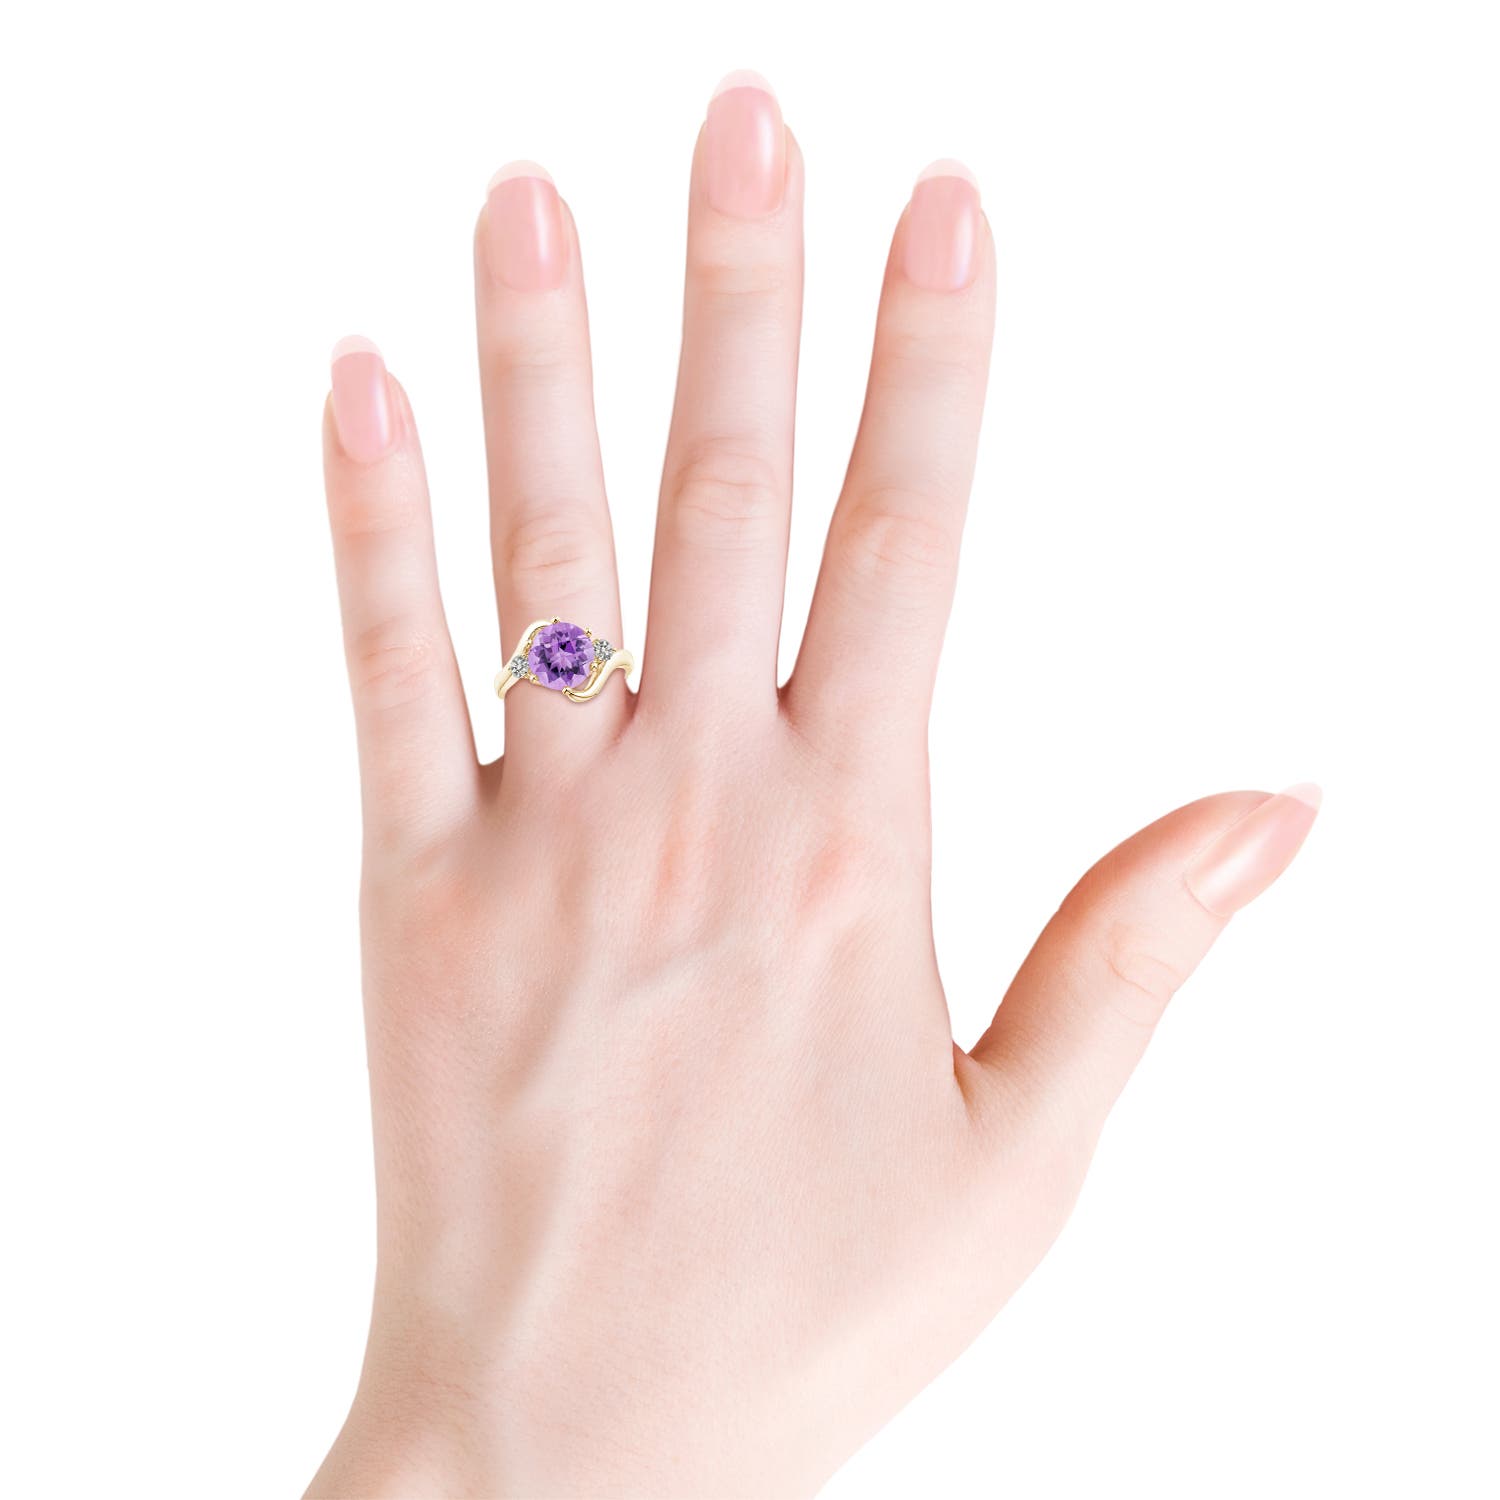 A - Amethyst / 2.31 CT / 14 KT Yellow Gold